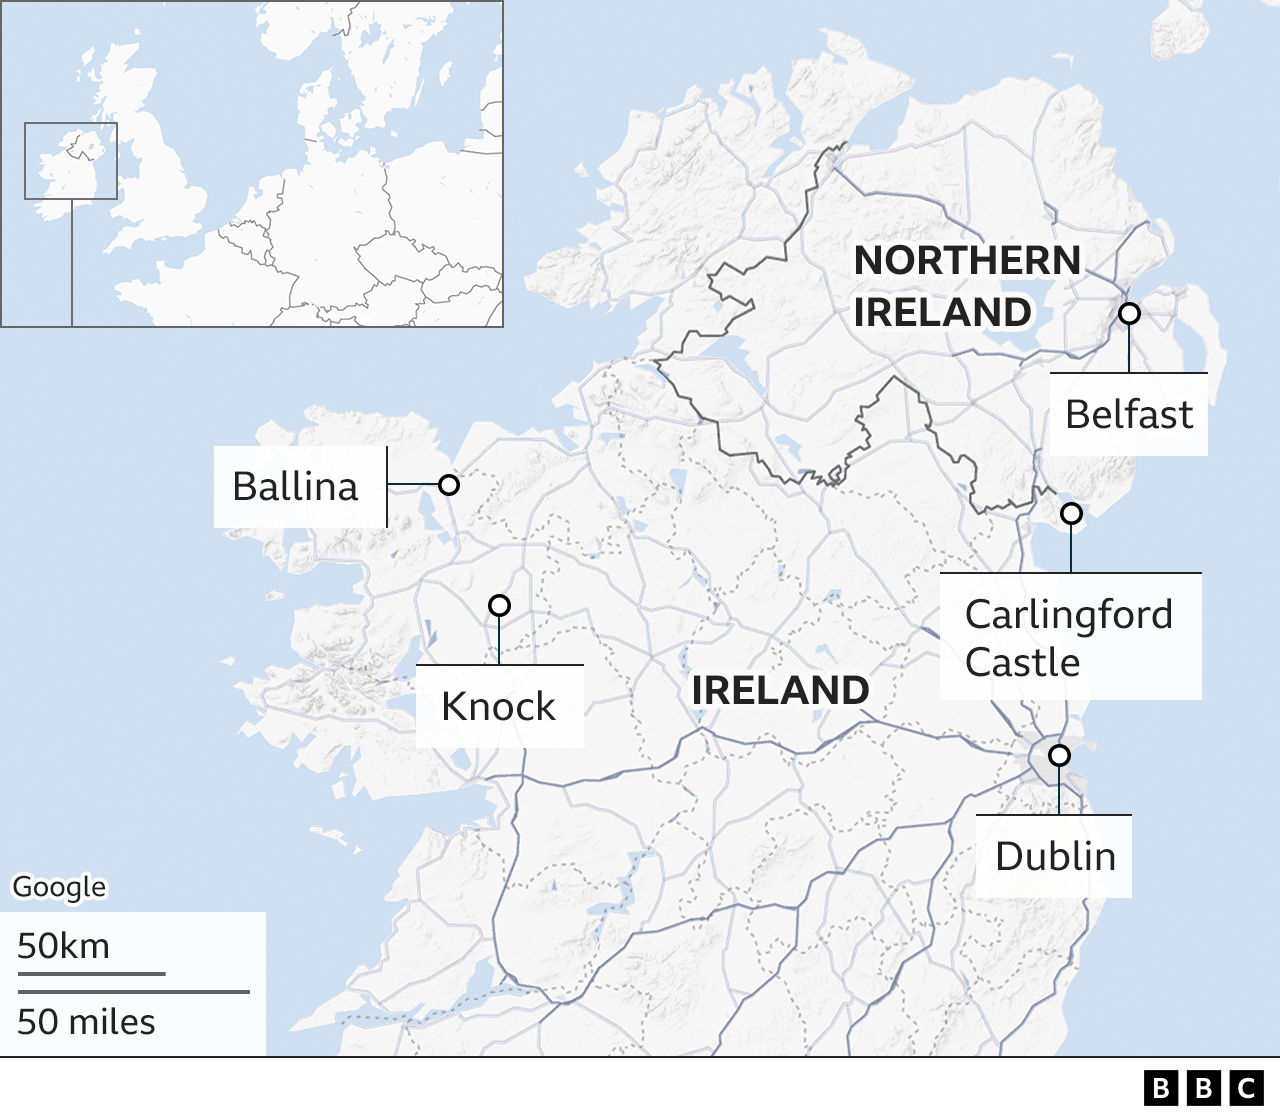 A map of Ireland showing the locations that Joe Biden is due to visit - they are Belfast, Dublin, Carlingford Castle, Ballina and Knock